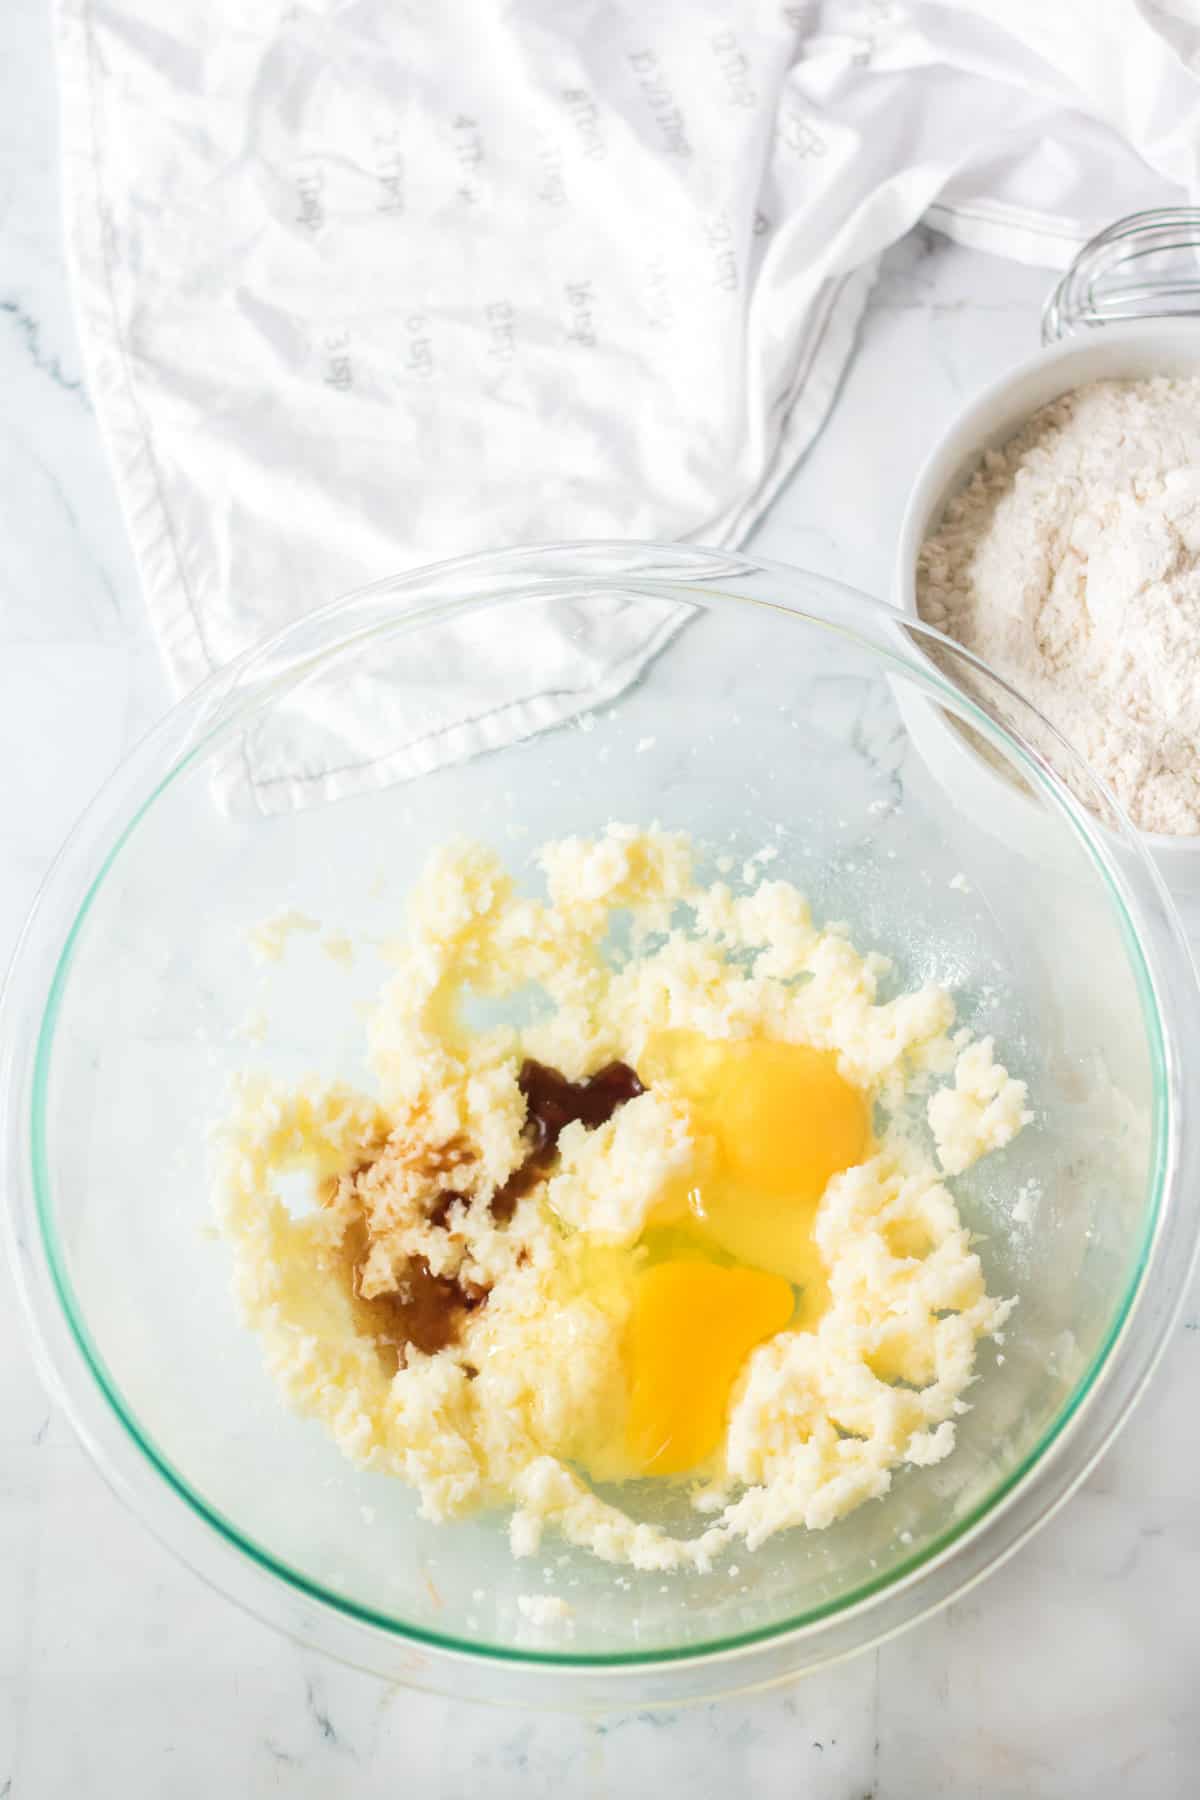 Eggs and vanilla added to mixing bowl.